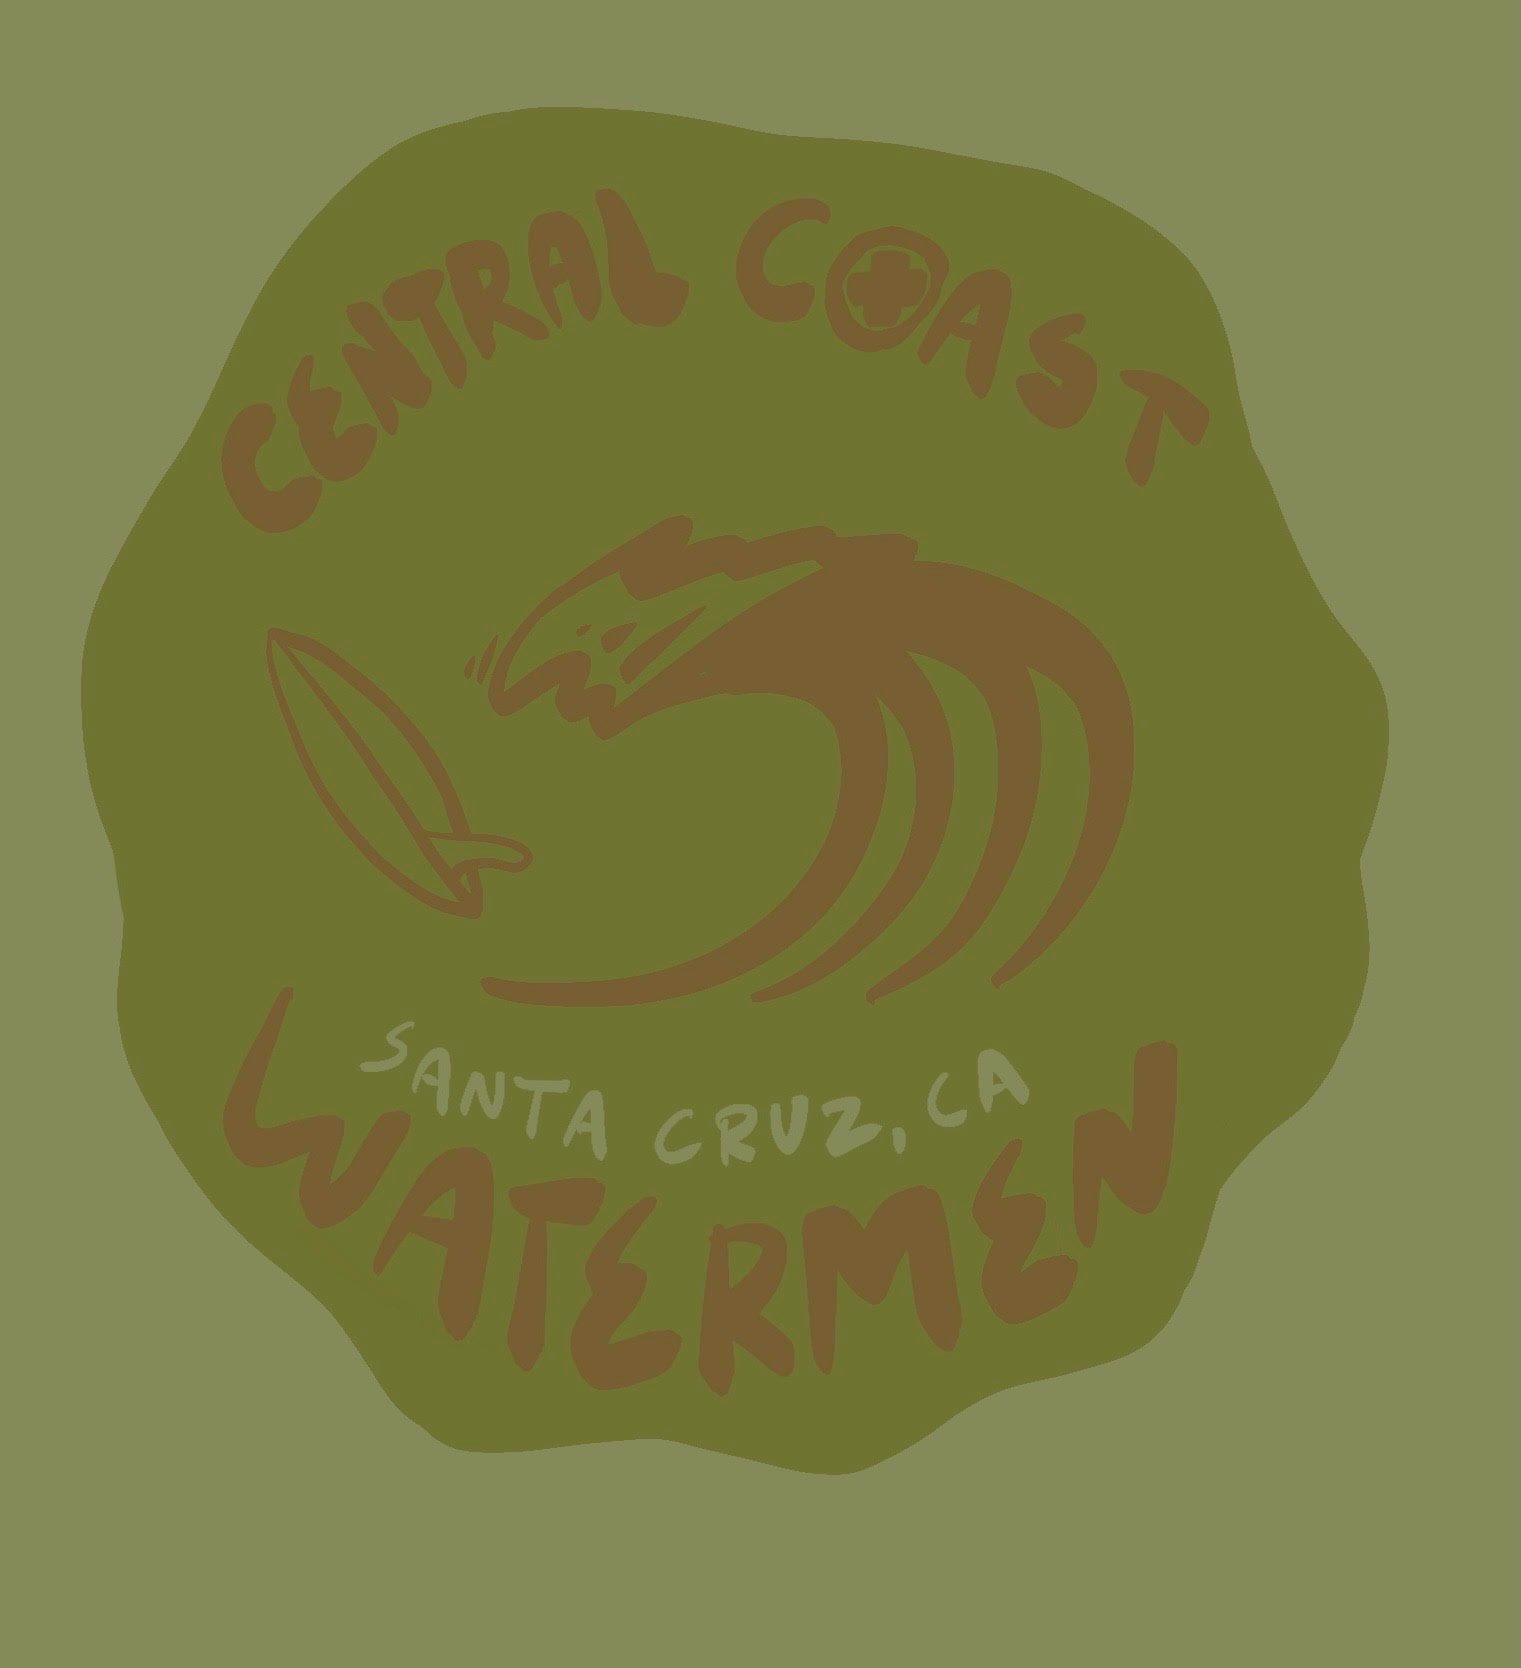 Wave Warriors Surf Camp with Central Coast Watermen’s Association